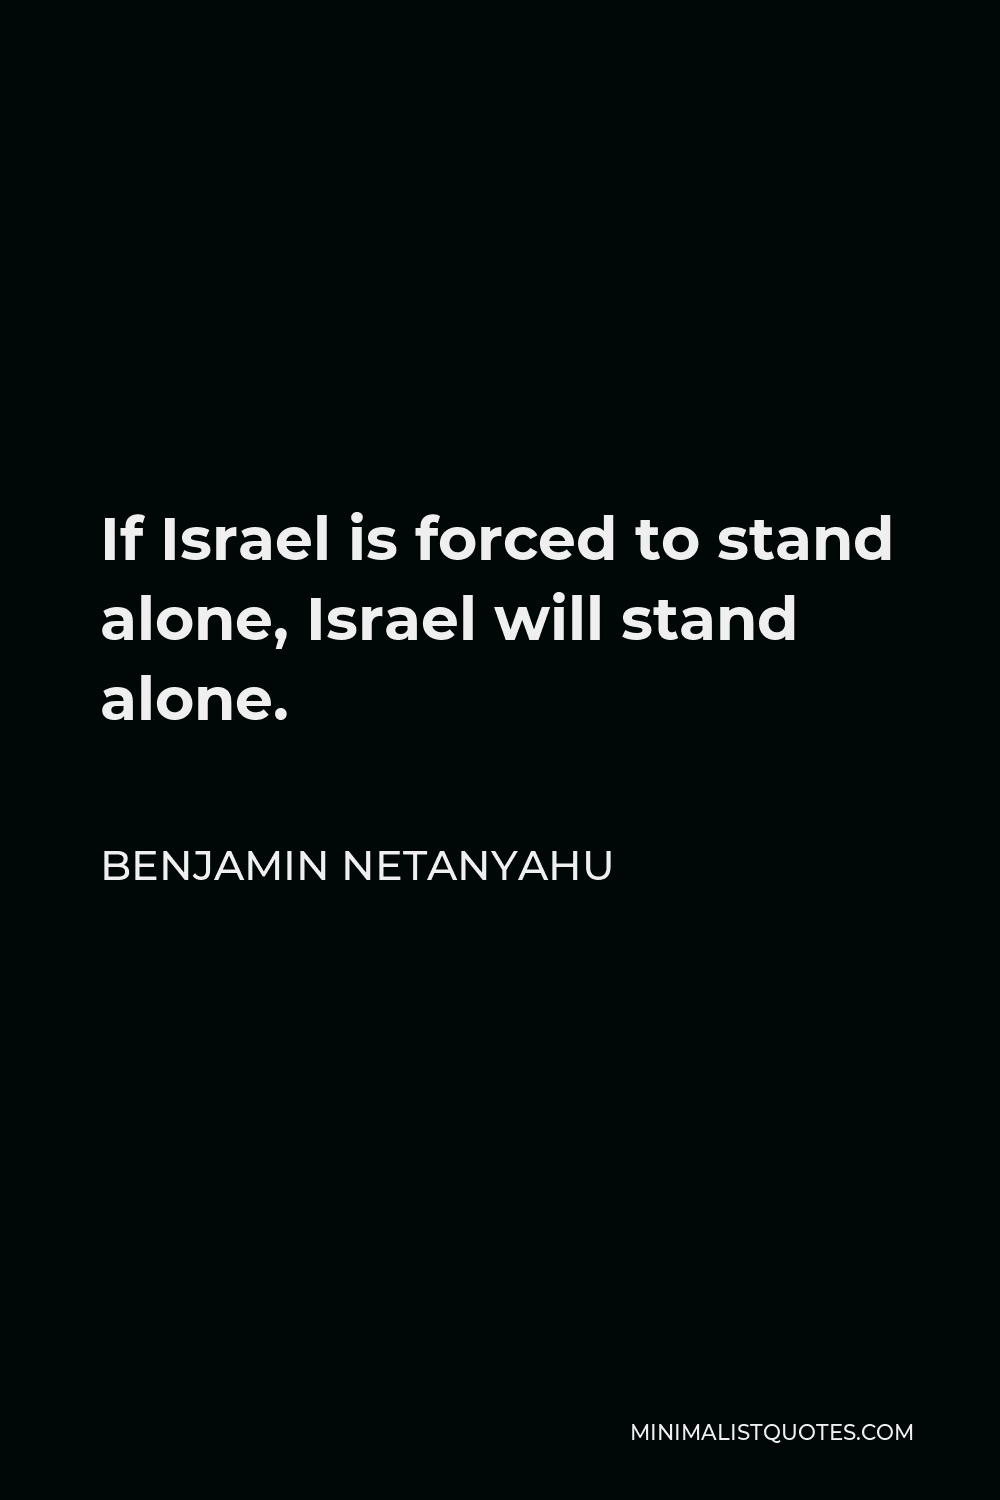 Benjamin Netanyahu Quote - If Israel is forced to stand alone, Israel will stand alone.